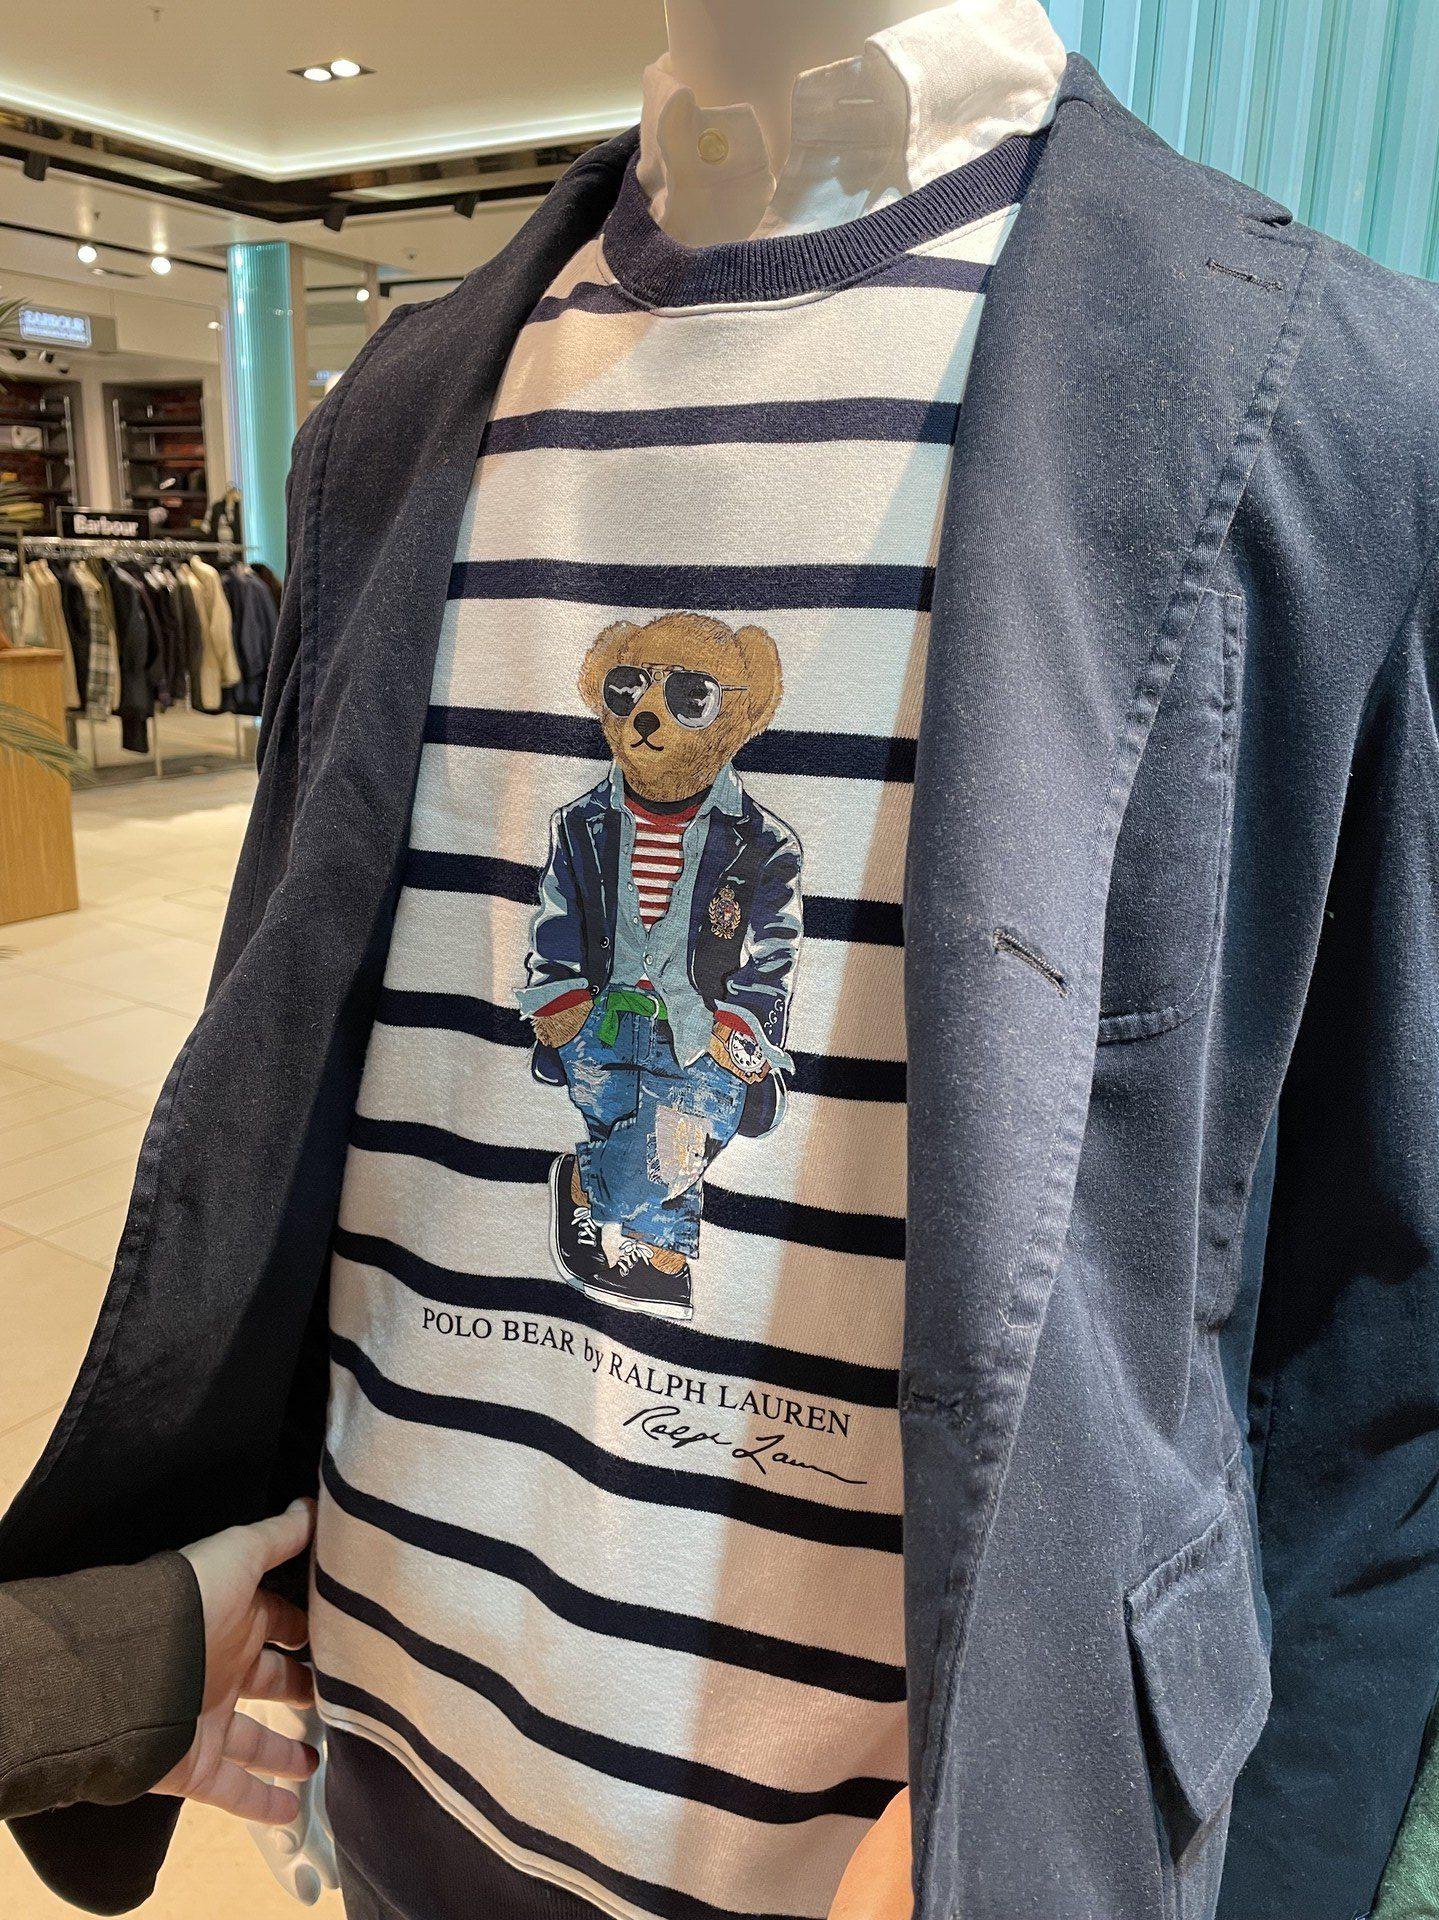 A plain-looking long-sleeve tshirt with a printed classy bear on the front, labeled "Polo Bear by Ralph Lauren"